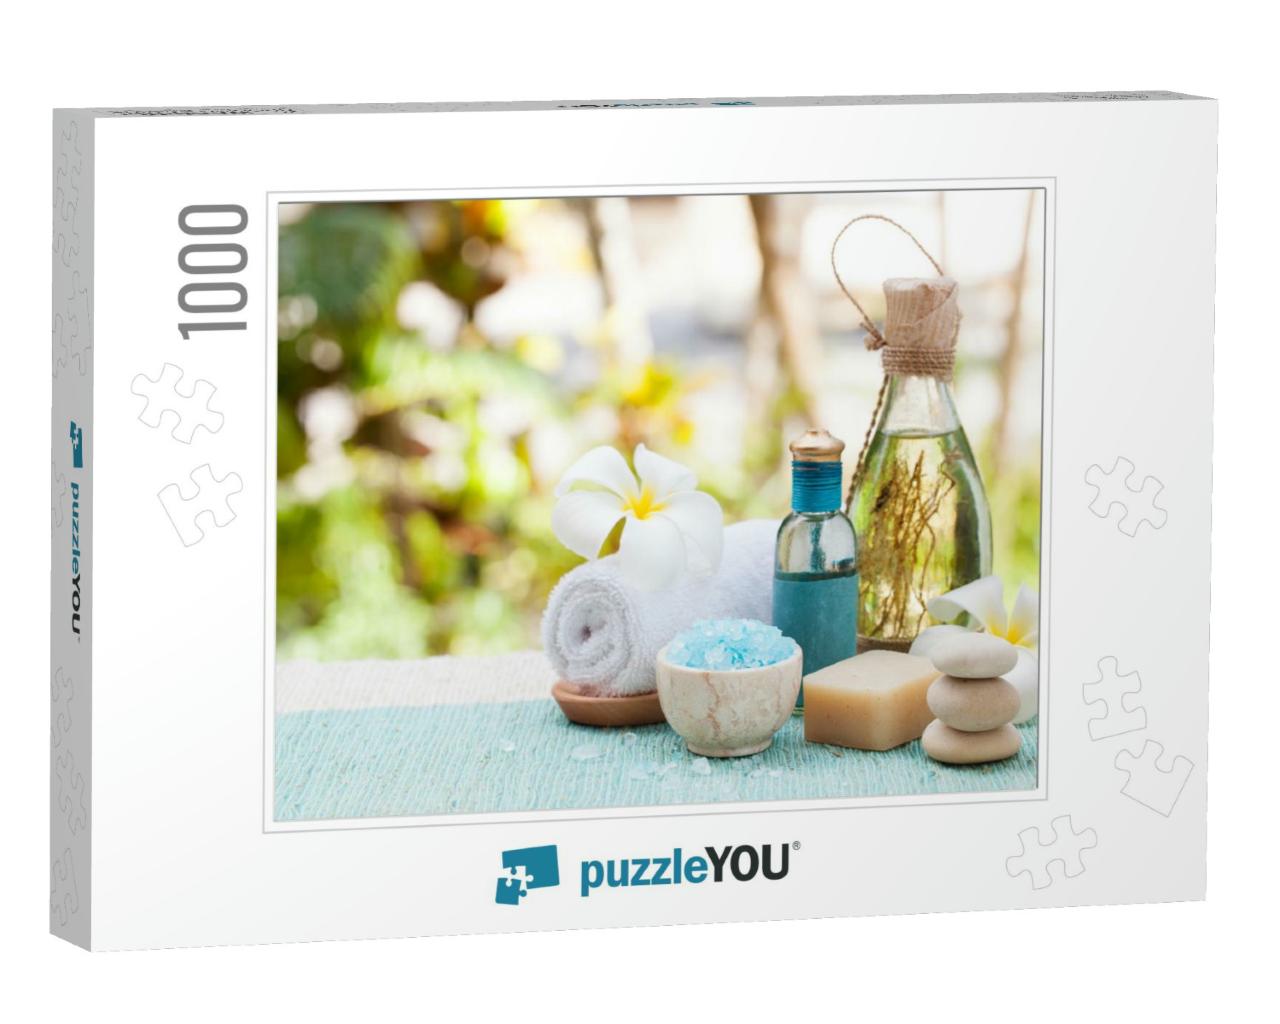 Spa & Wellness Massage Setting Still Life with Essential... Jigsaw Puzzle with 1000 pieces